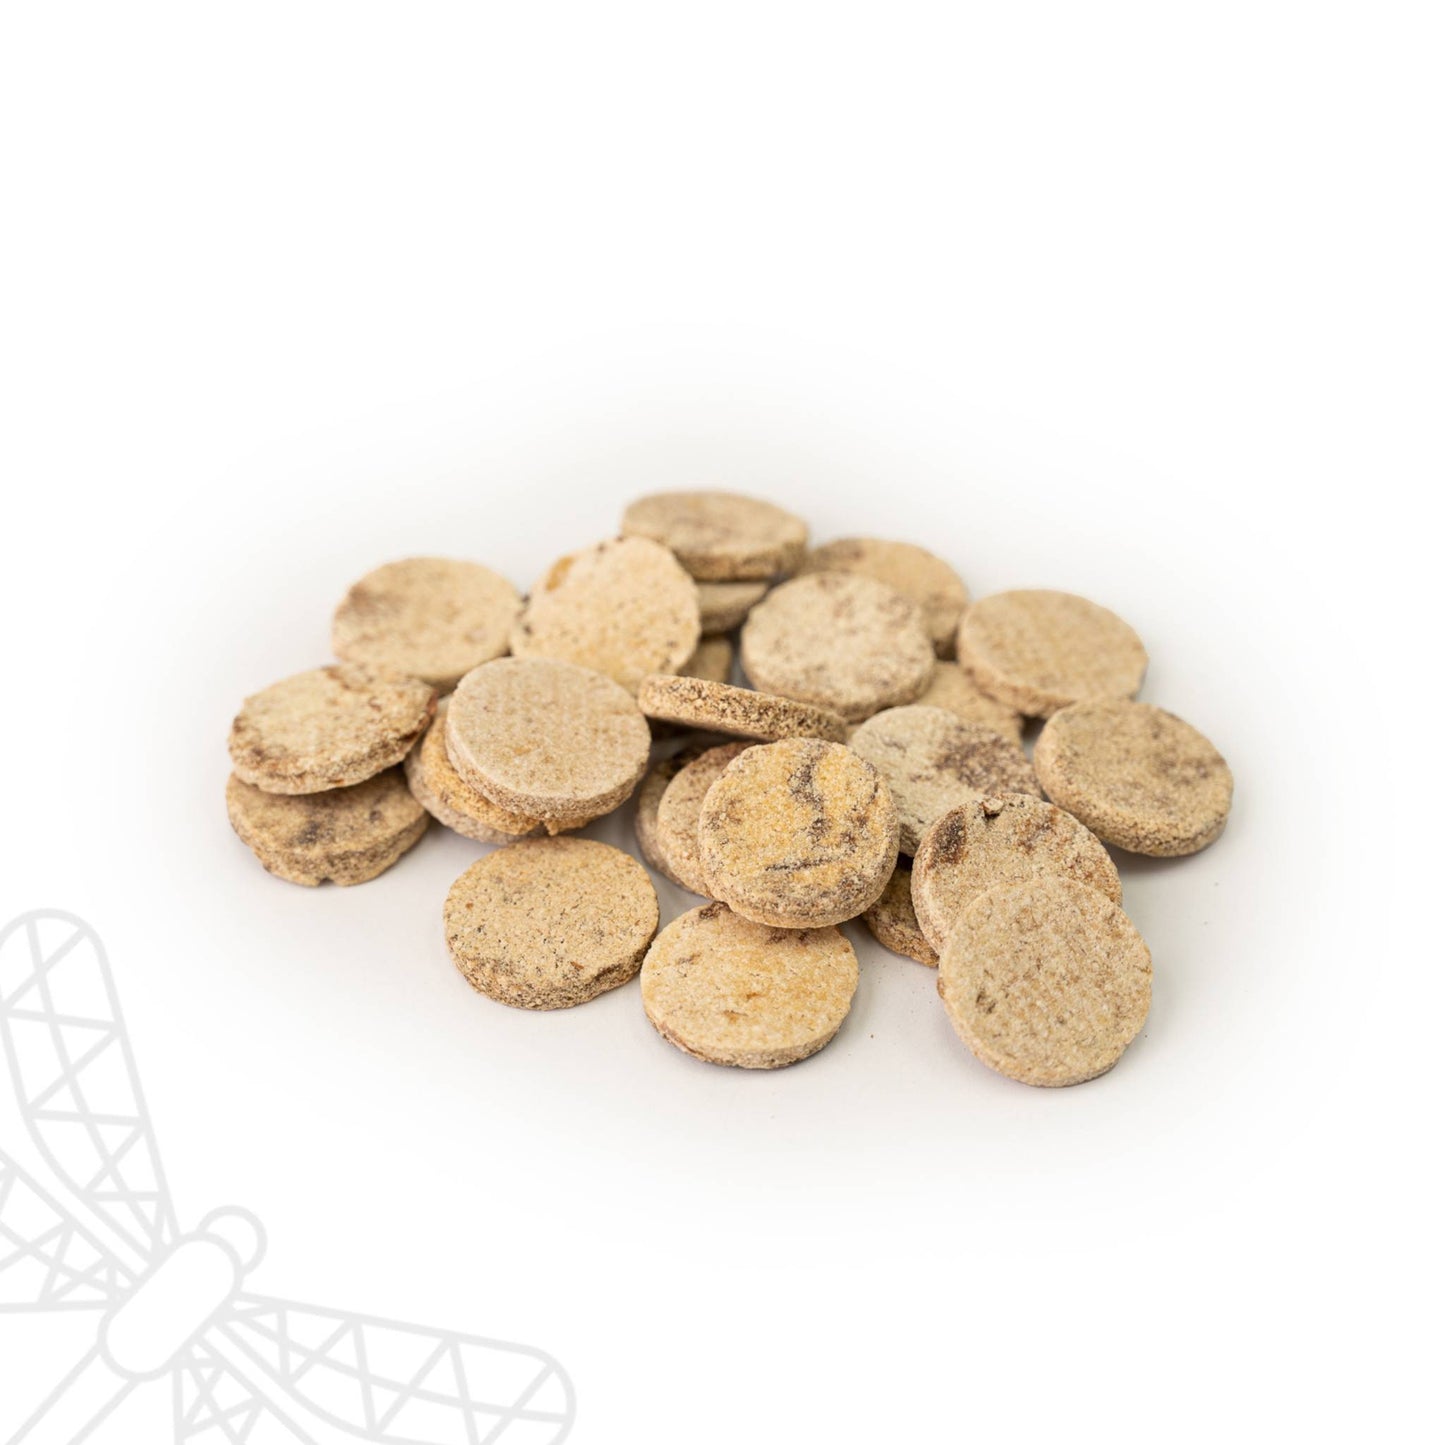 Banana flavour biscuits for dogs